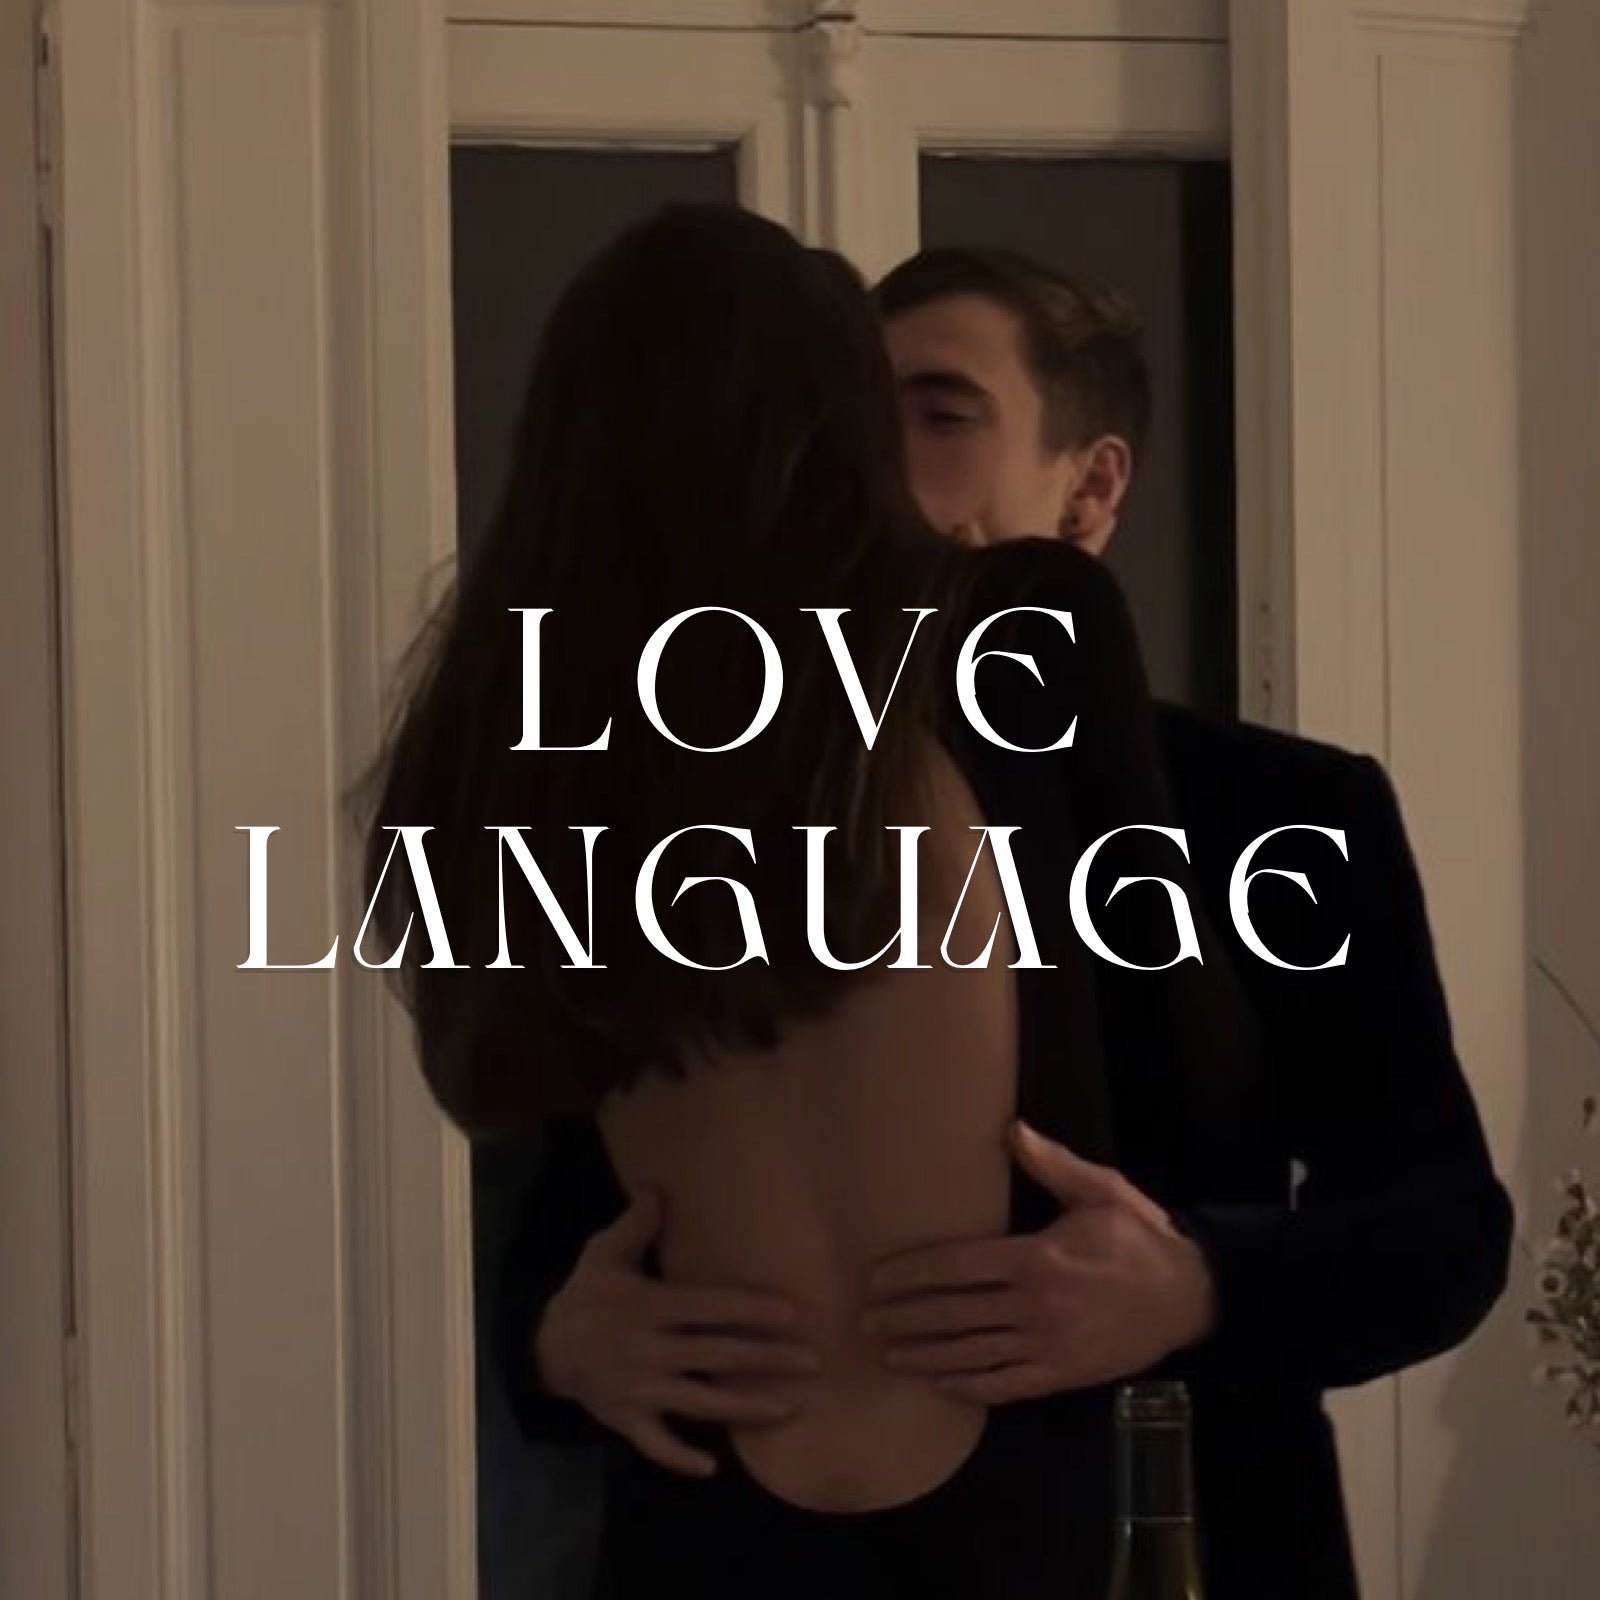 What are the 5 types of love languages?